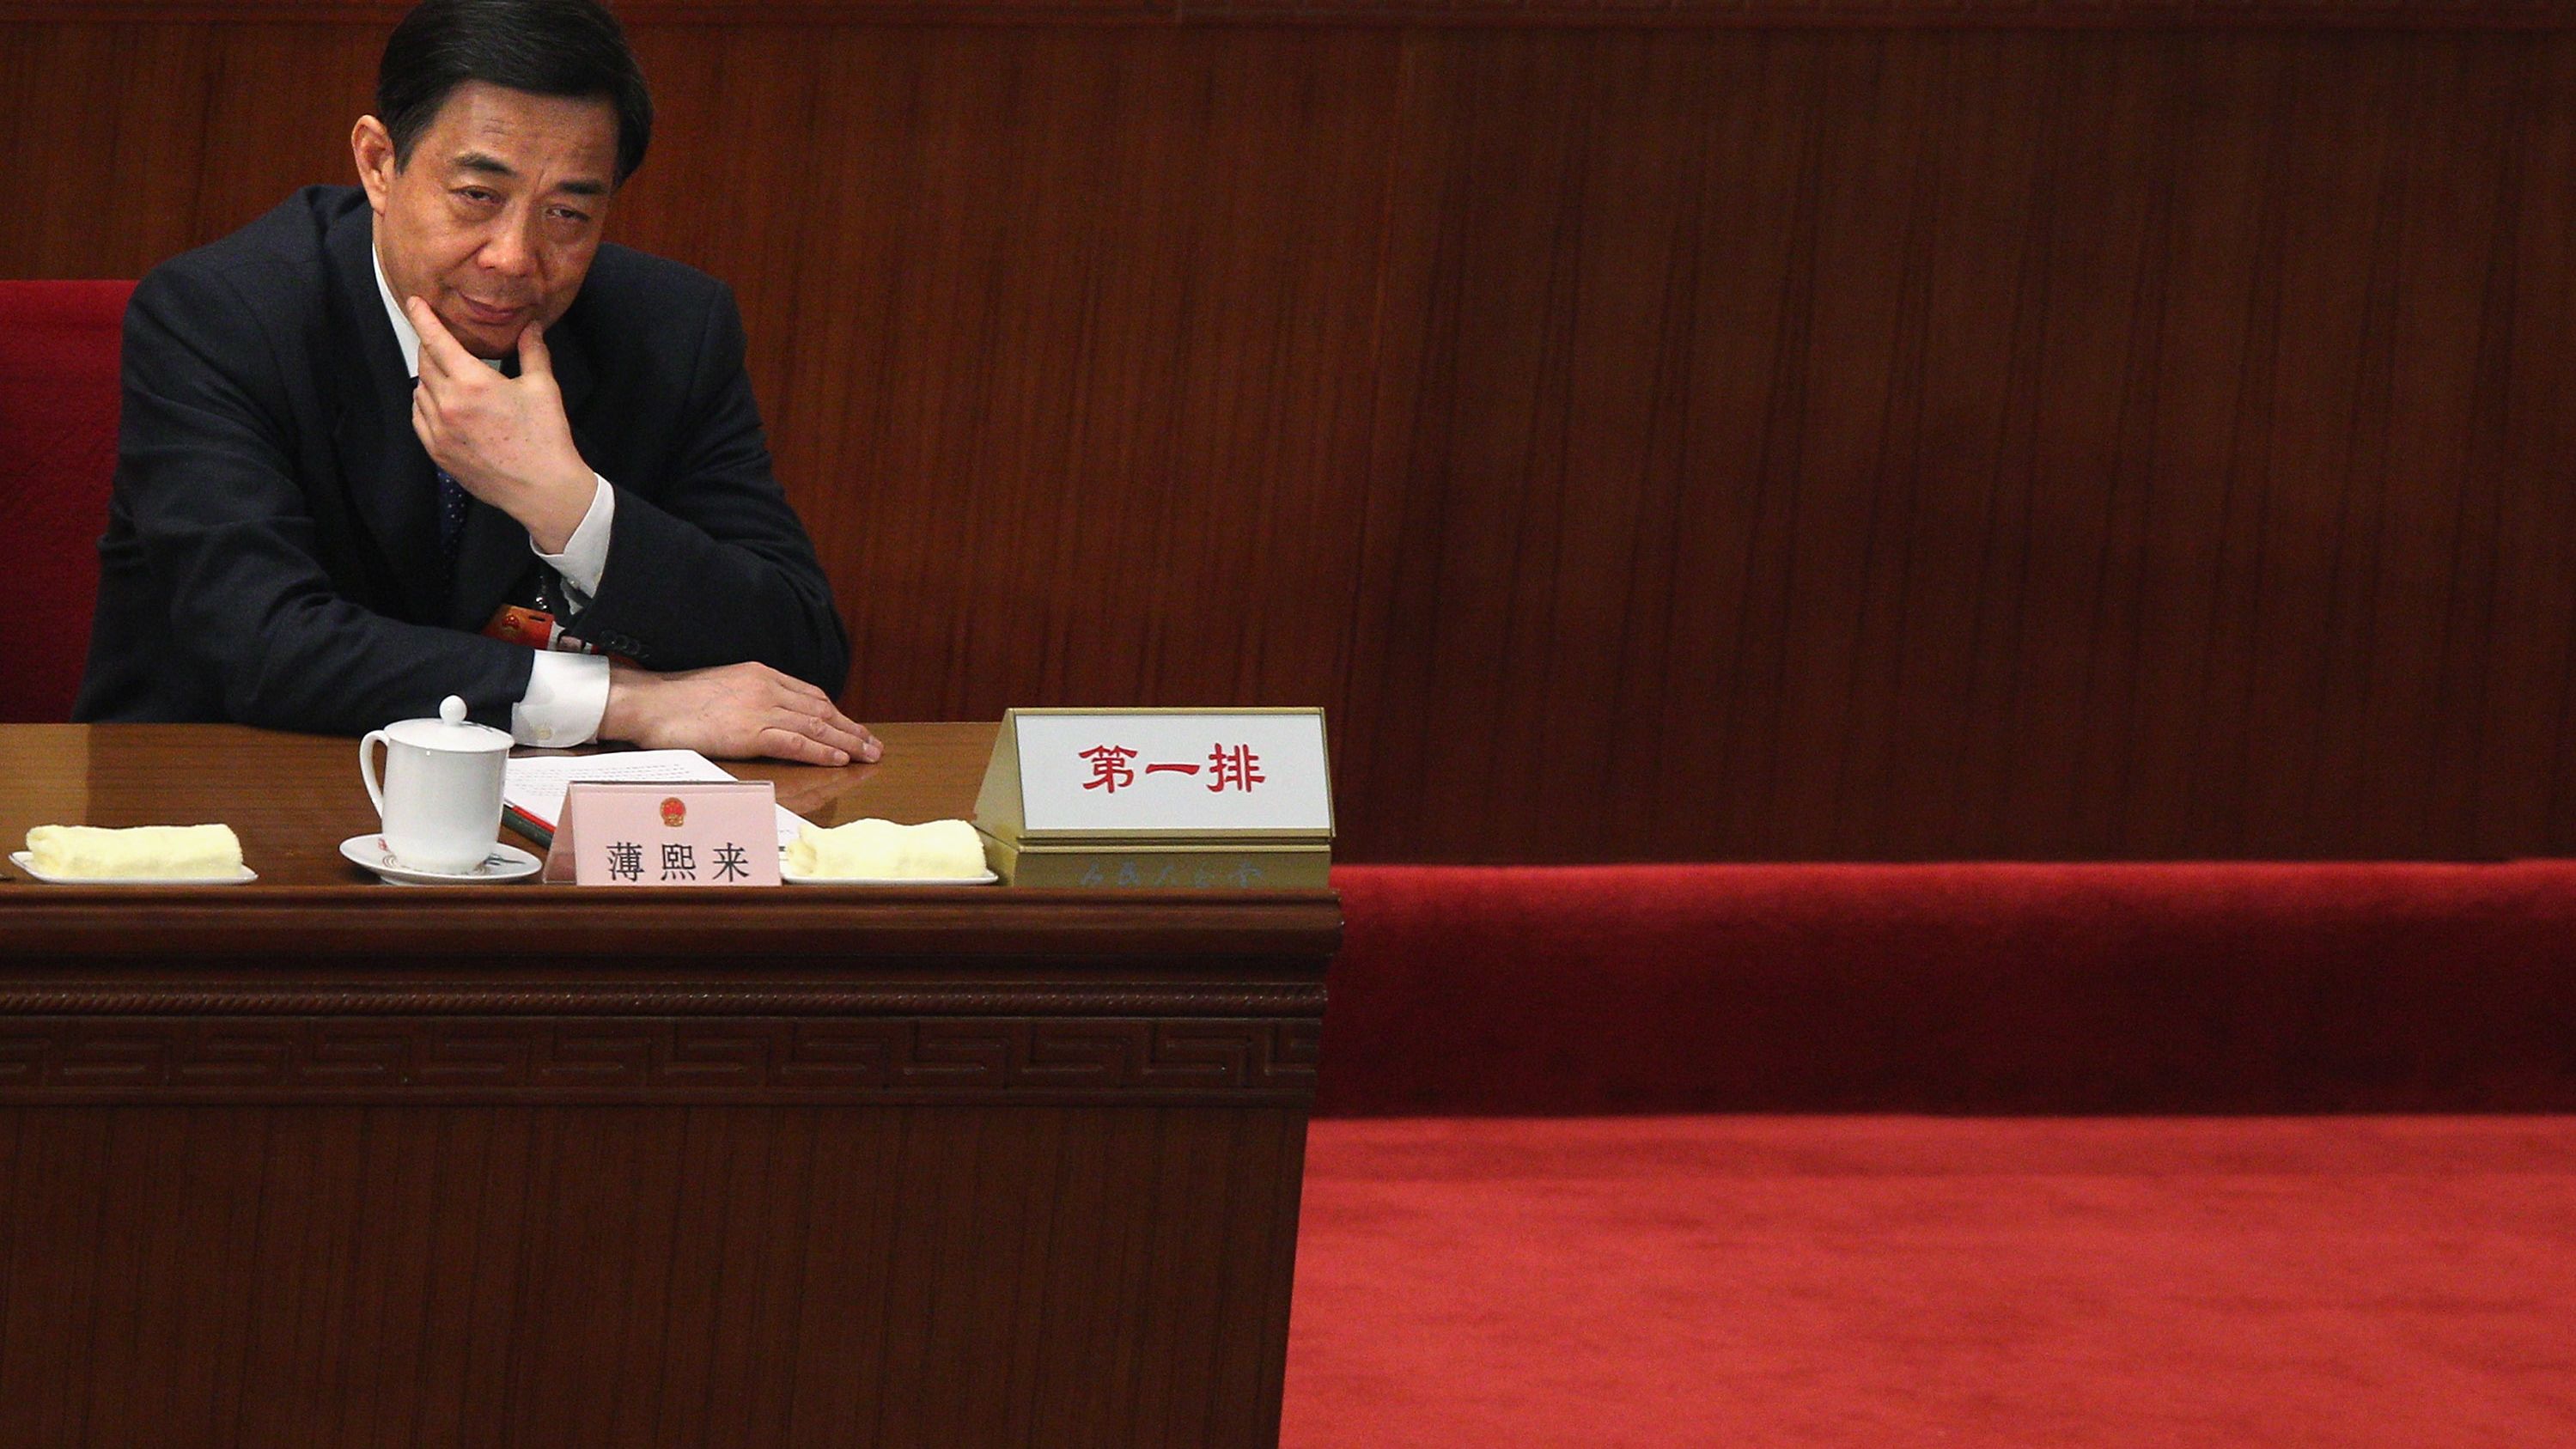 After the sentencing the Chinese police chief who sparked the saga, the question remains: What will happen to Bo Xilai?